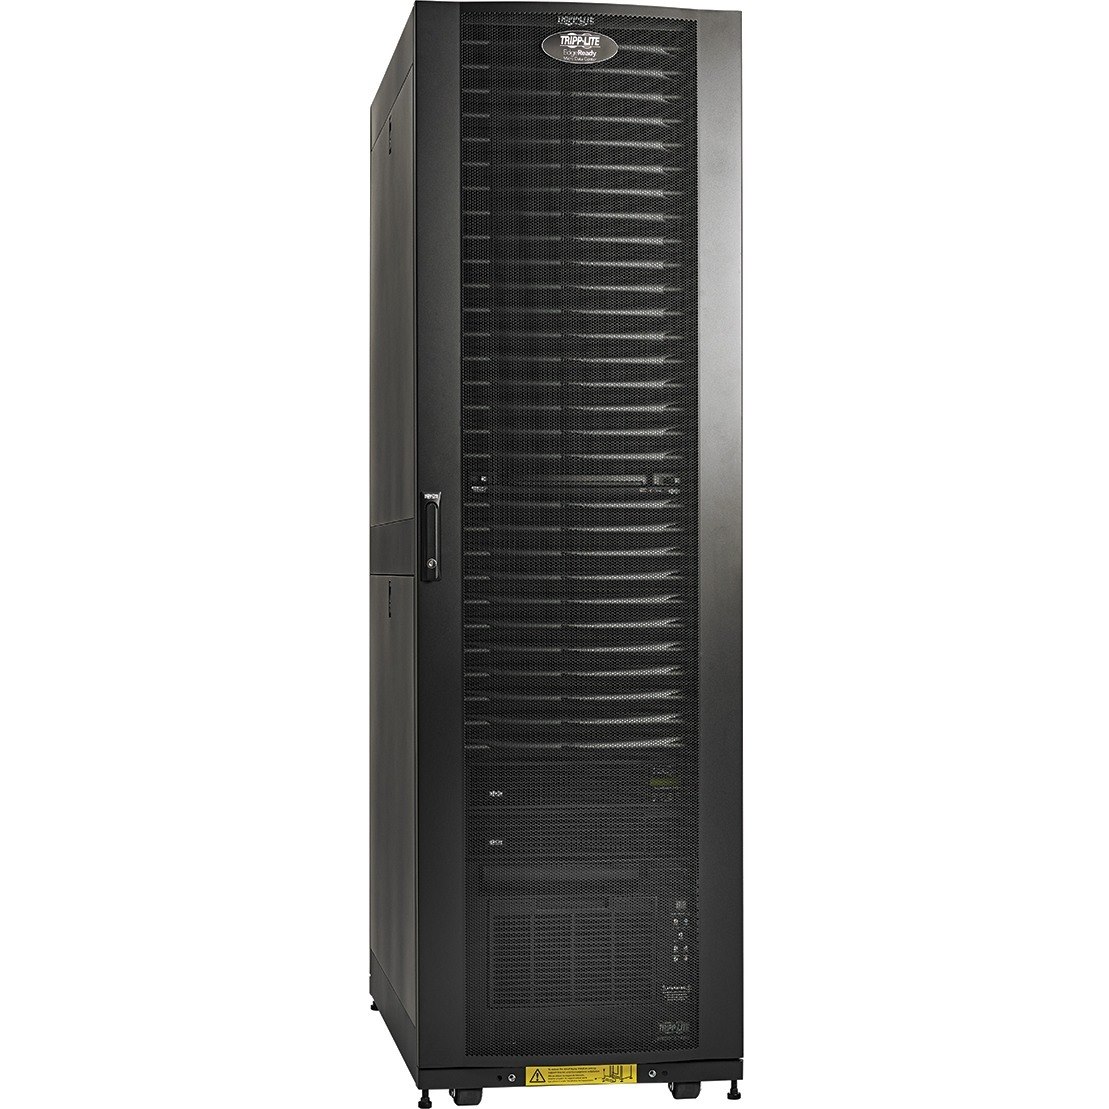 Tripp Lite by Eaton EdgeReady&trade; Micro Data Center - 38U, (2) 3 kVA UPS Systems (N+N), Network Management and Dual PDUs, 120V Kit